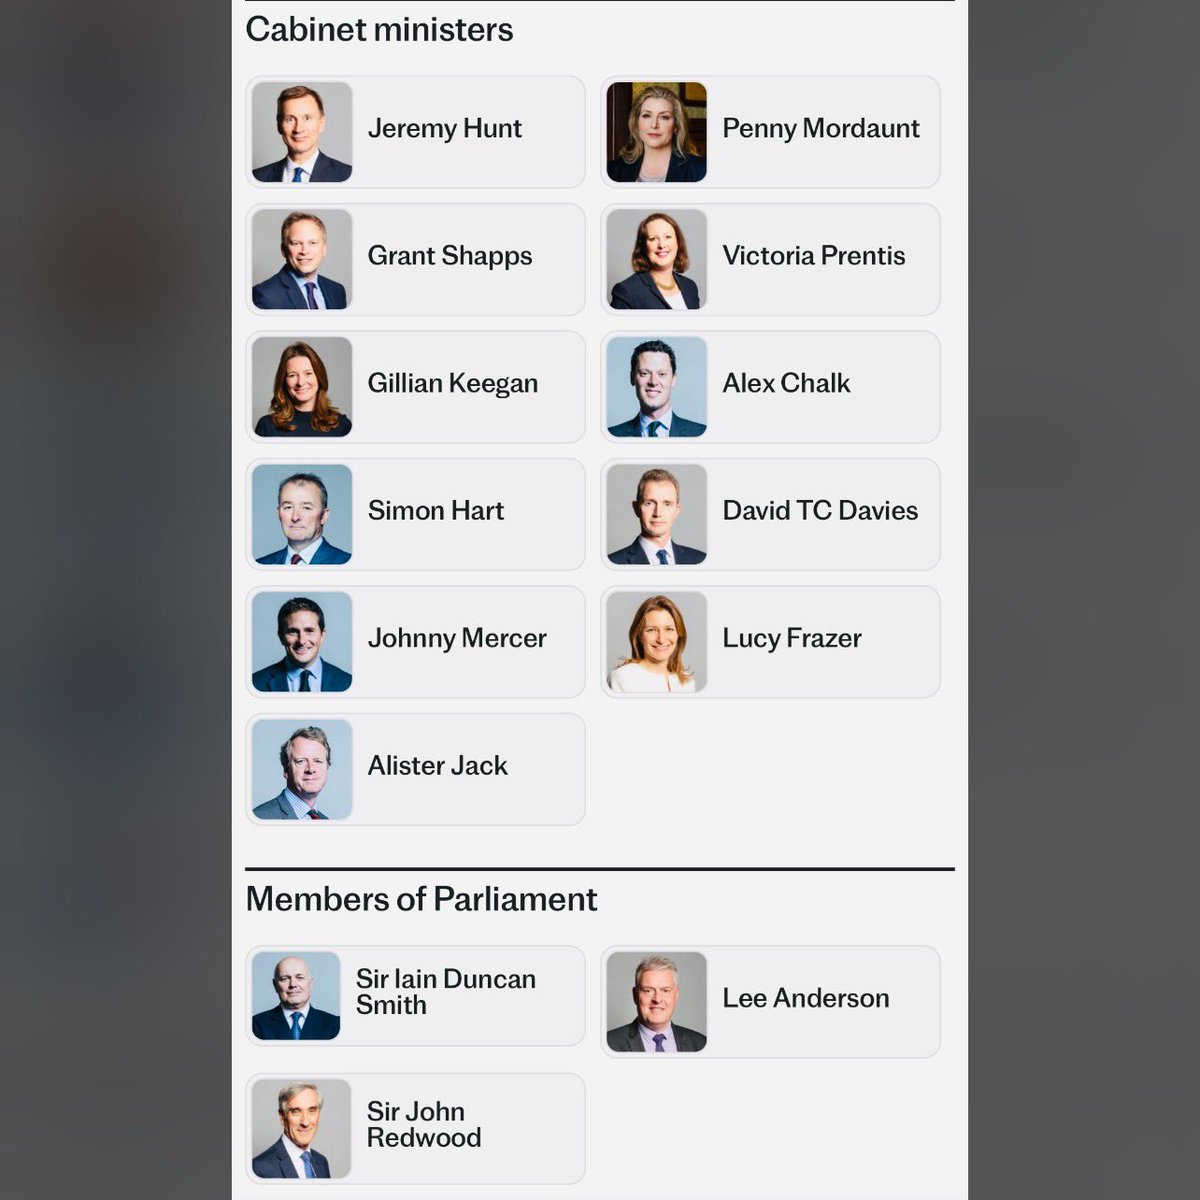 Tory 'Bigshots'  predicted to lose their seats in You Gov poll 

Jeremy Hunt 
Grant Shapps
Penny Mordaunt
Gillian Keegan 
Simon Hart 
Johnny Mercer 
31.17p (inflation) Lee Anderson 
John Redwood 
Lucy Frazer 

Bring on Tactical Voting to make it even worse for the Tories